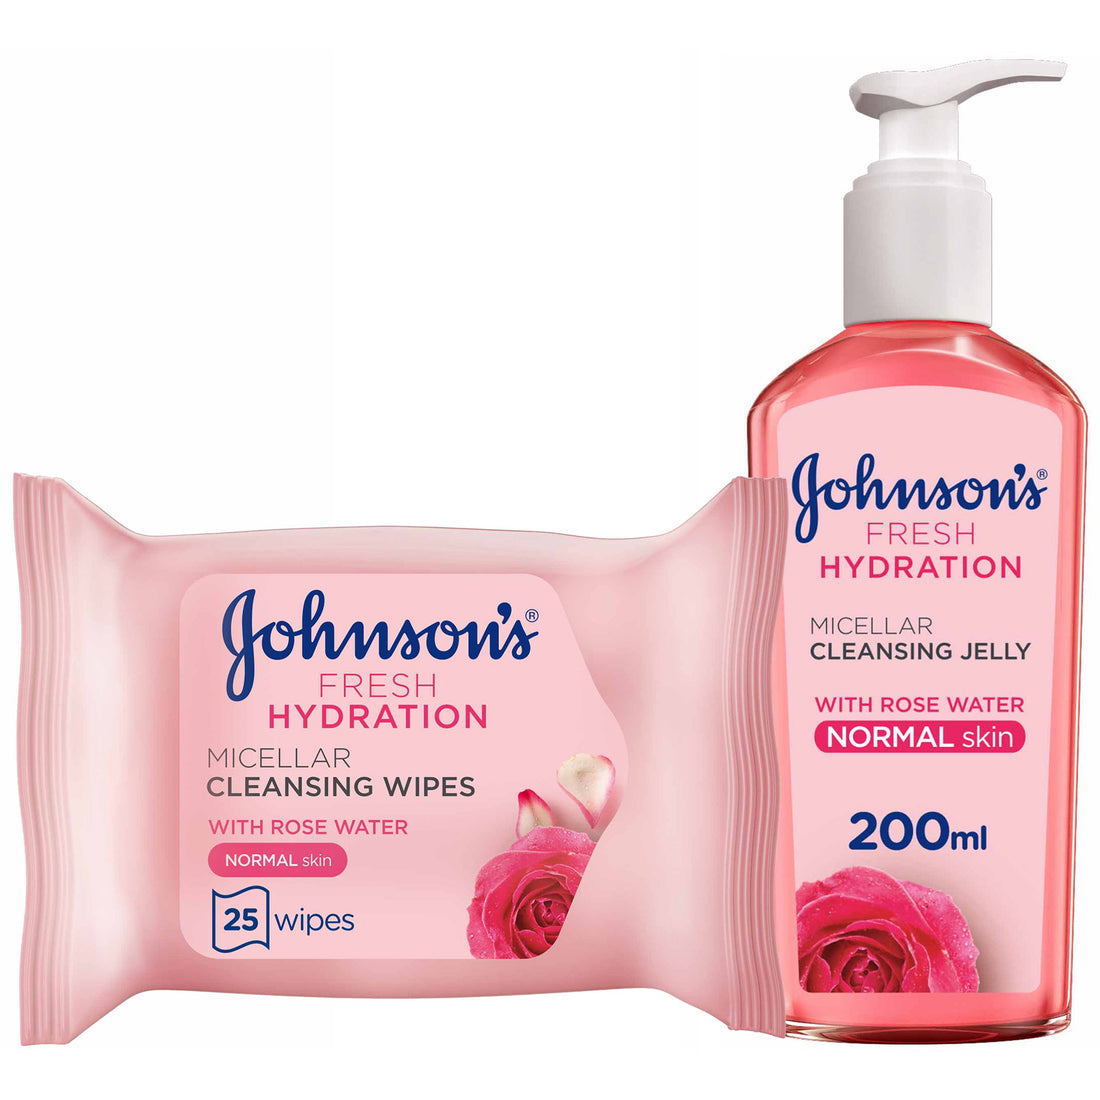 JOHNSON’S Fresh Hydration, Micellar Cleansing Jelly 200ml + Cleansing Facial Micellar Wipes, 25 wipes